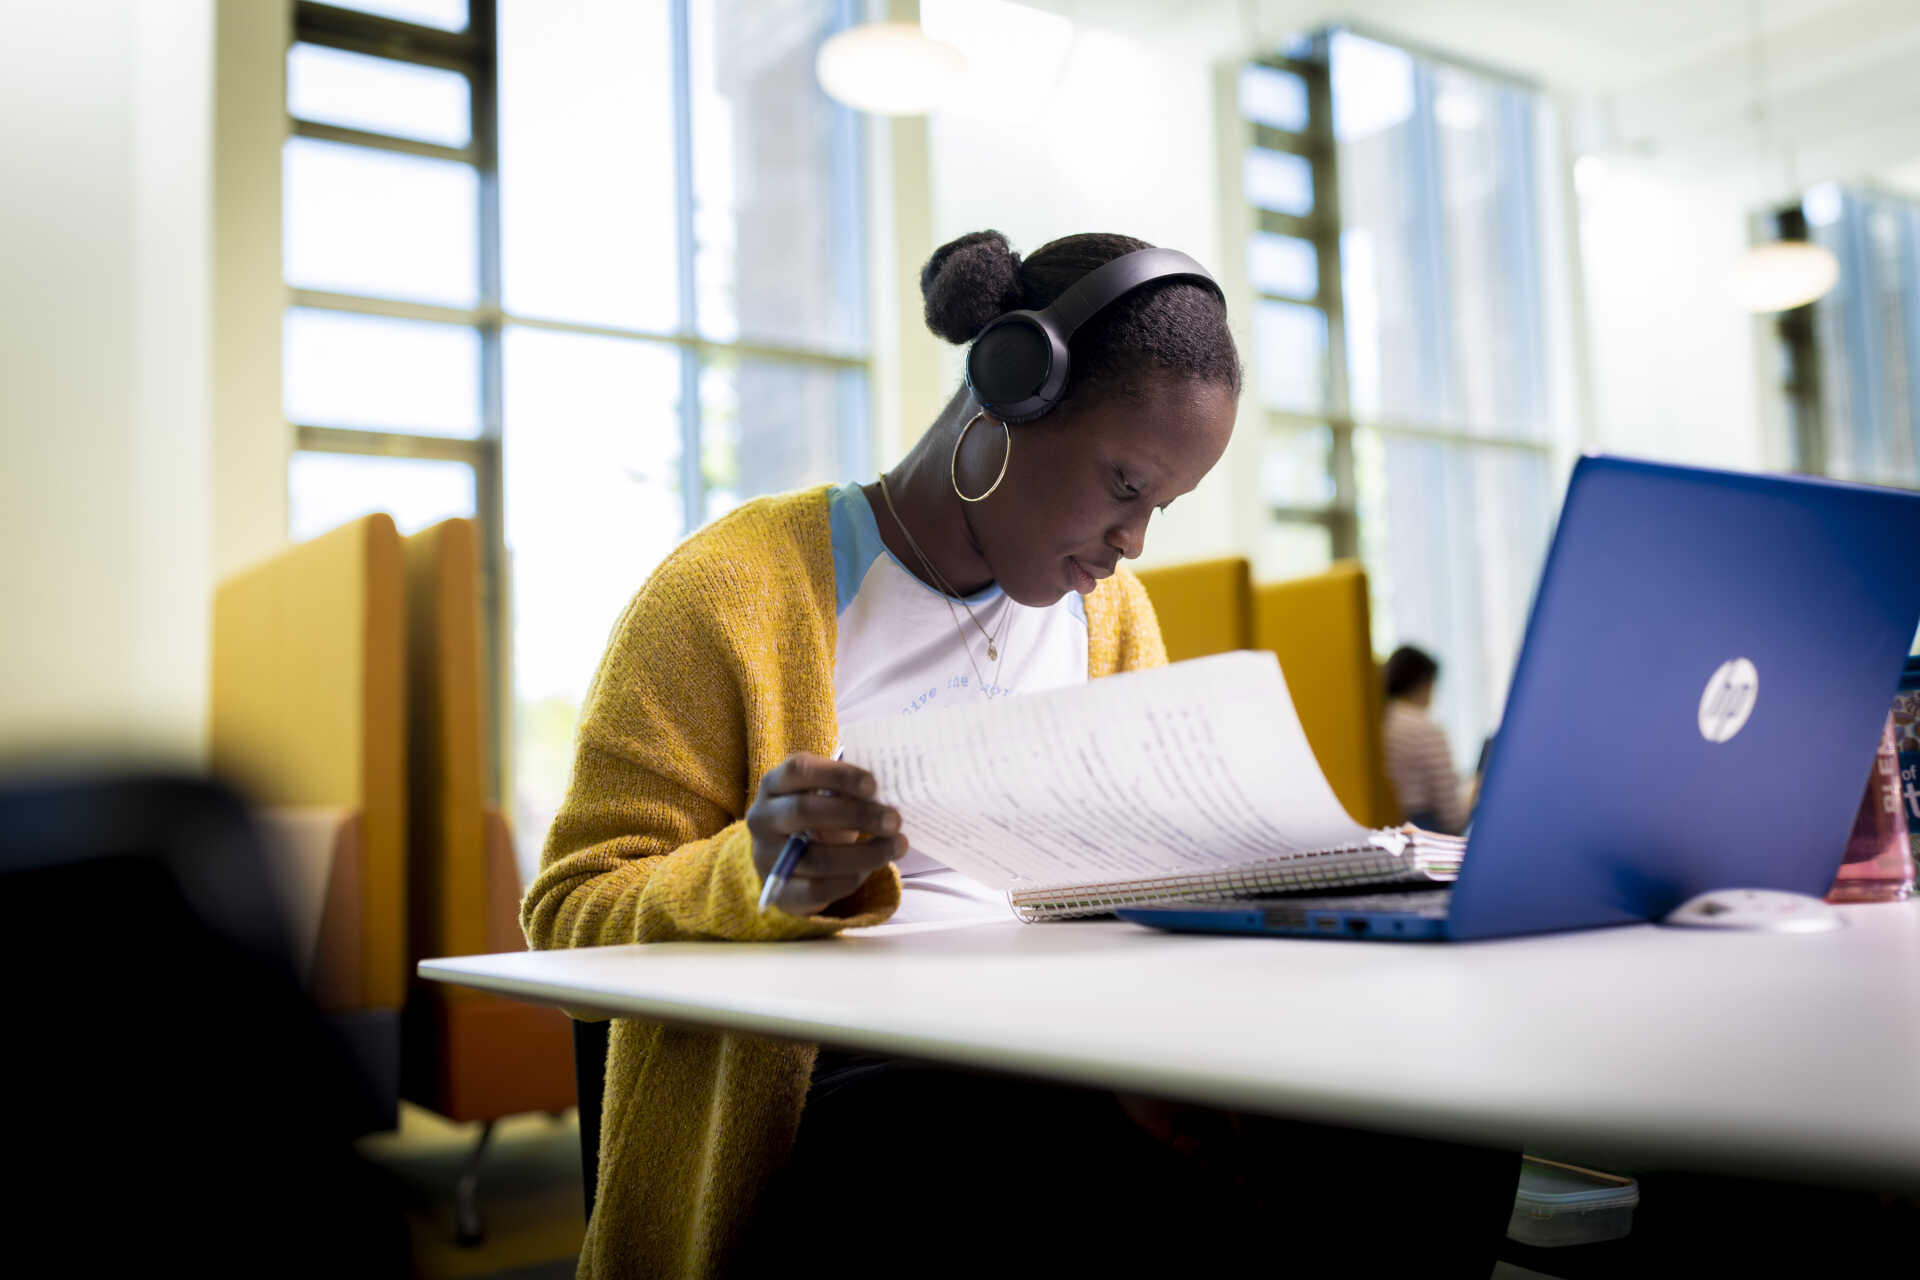 Student with headphones on looking at notes next to laptop